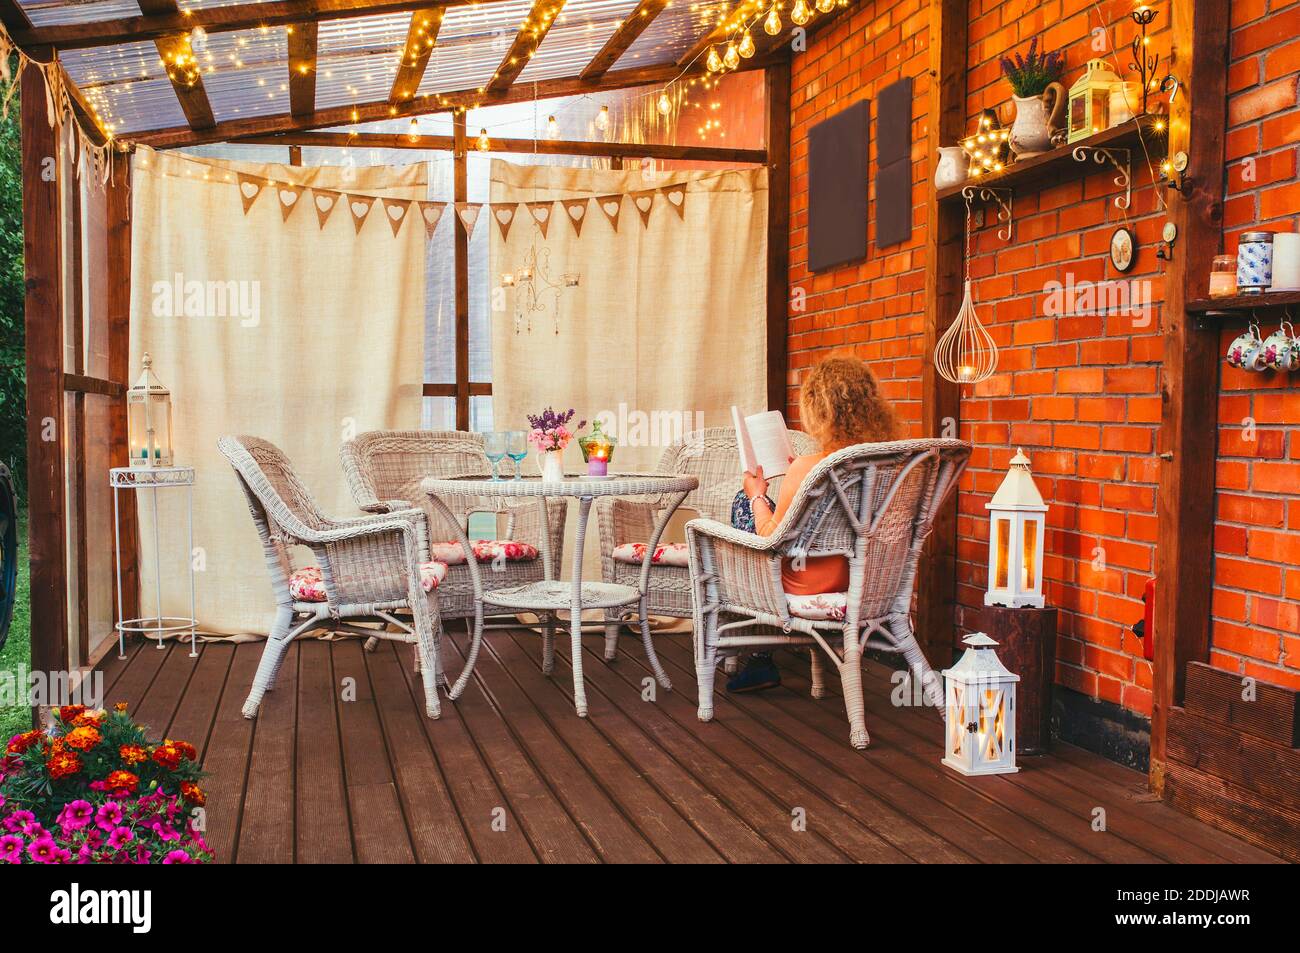 Hygge balcony concept. Woman reading a paper book on home balcony outdoors. Party string lights illuminating the space. Lot of candles and lanterns. Stock Photo